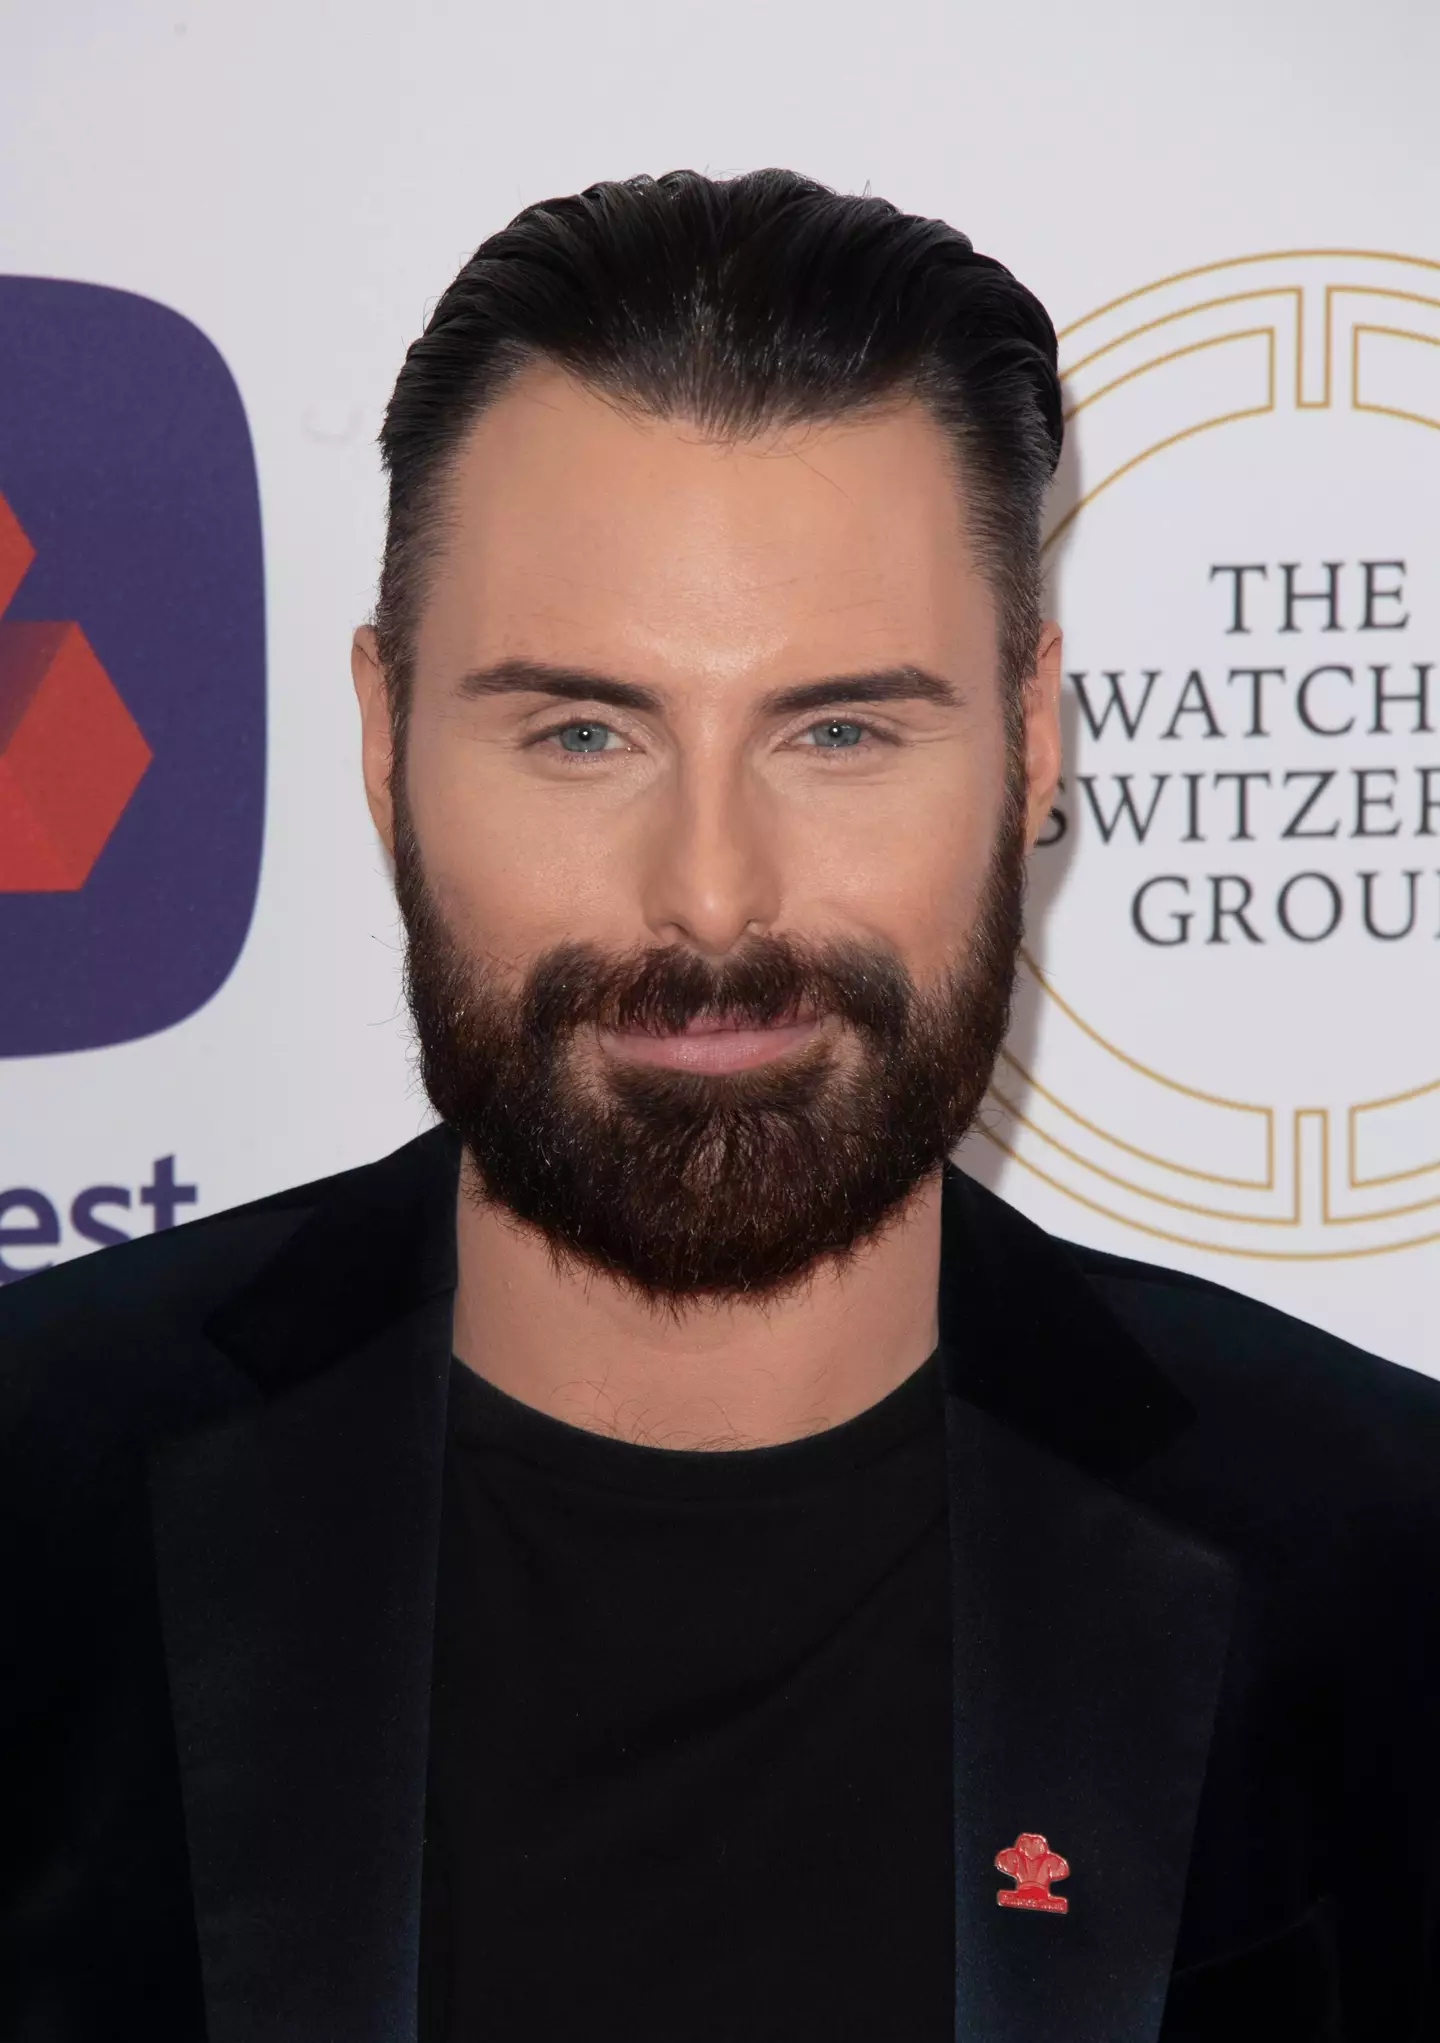 Rylan responded with a message of support for Spraggan.